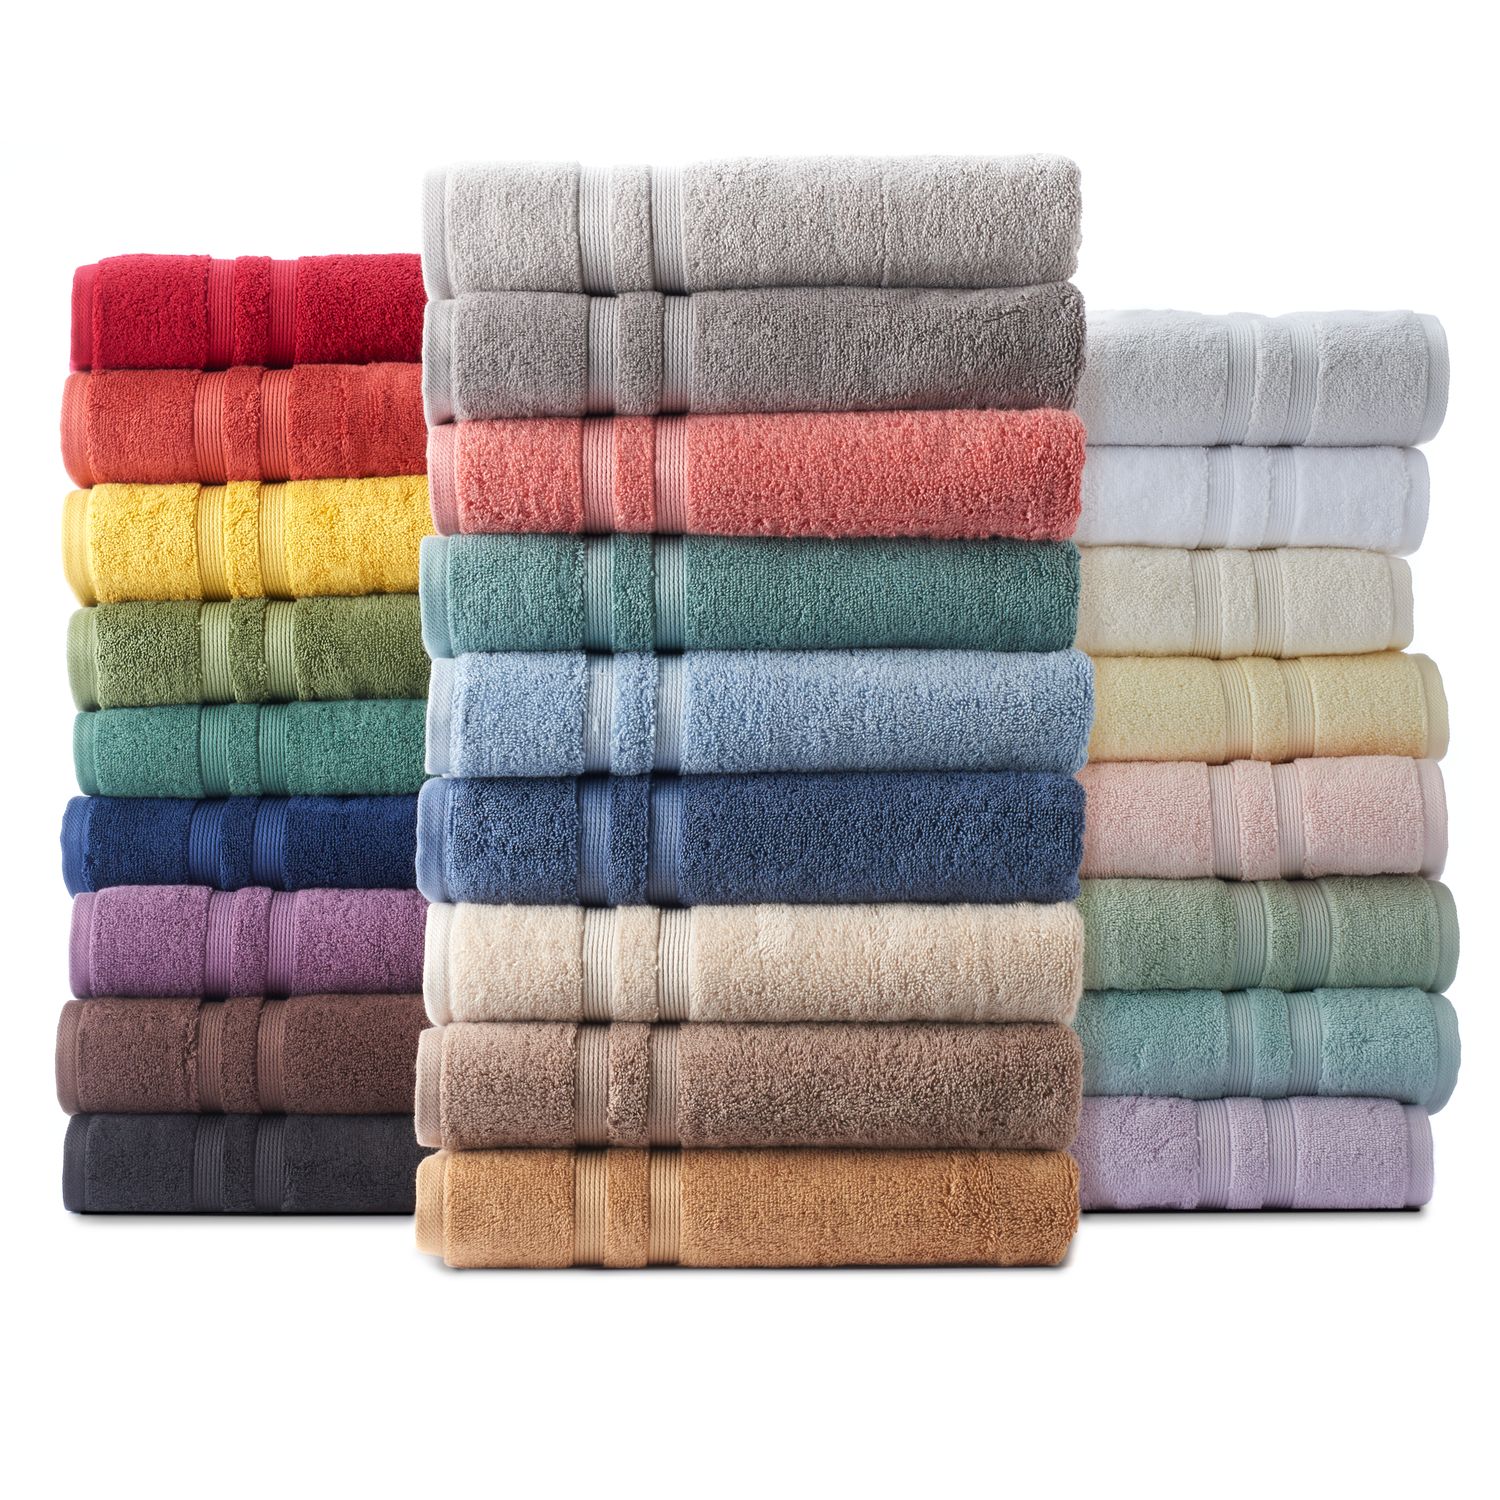 bath towel collections